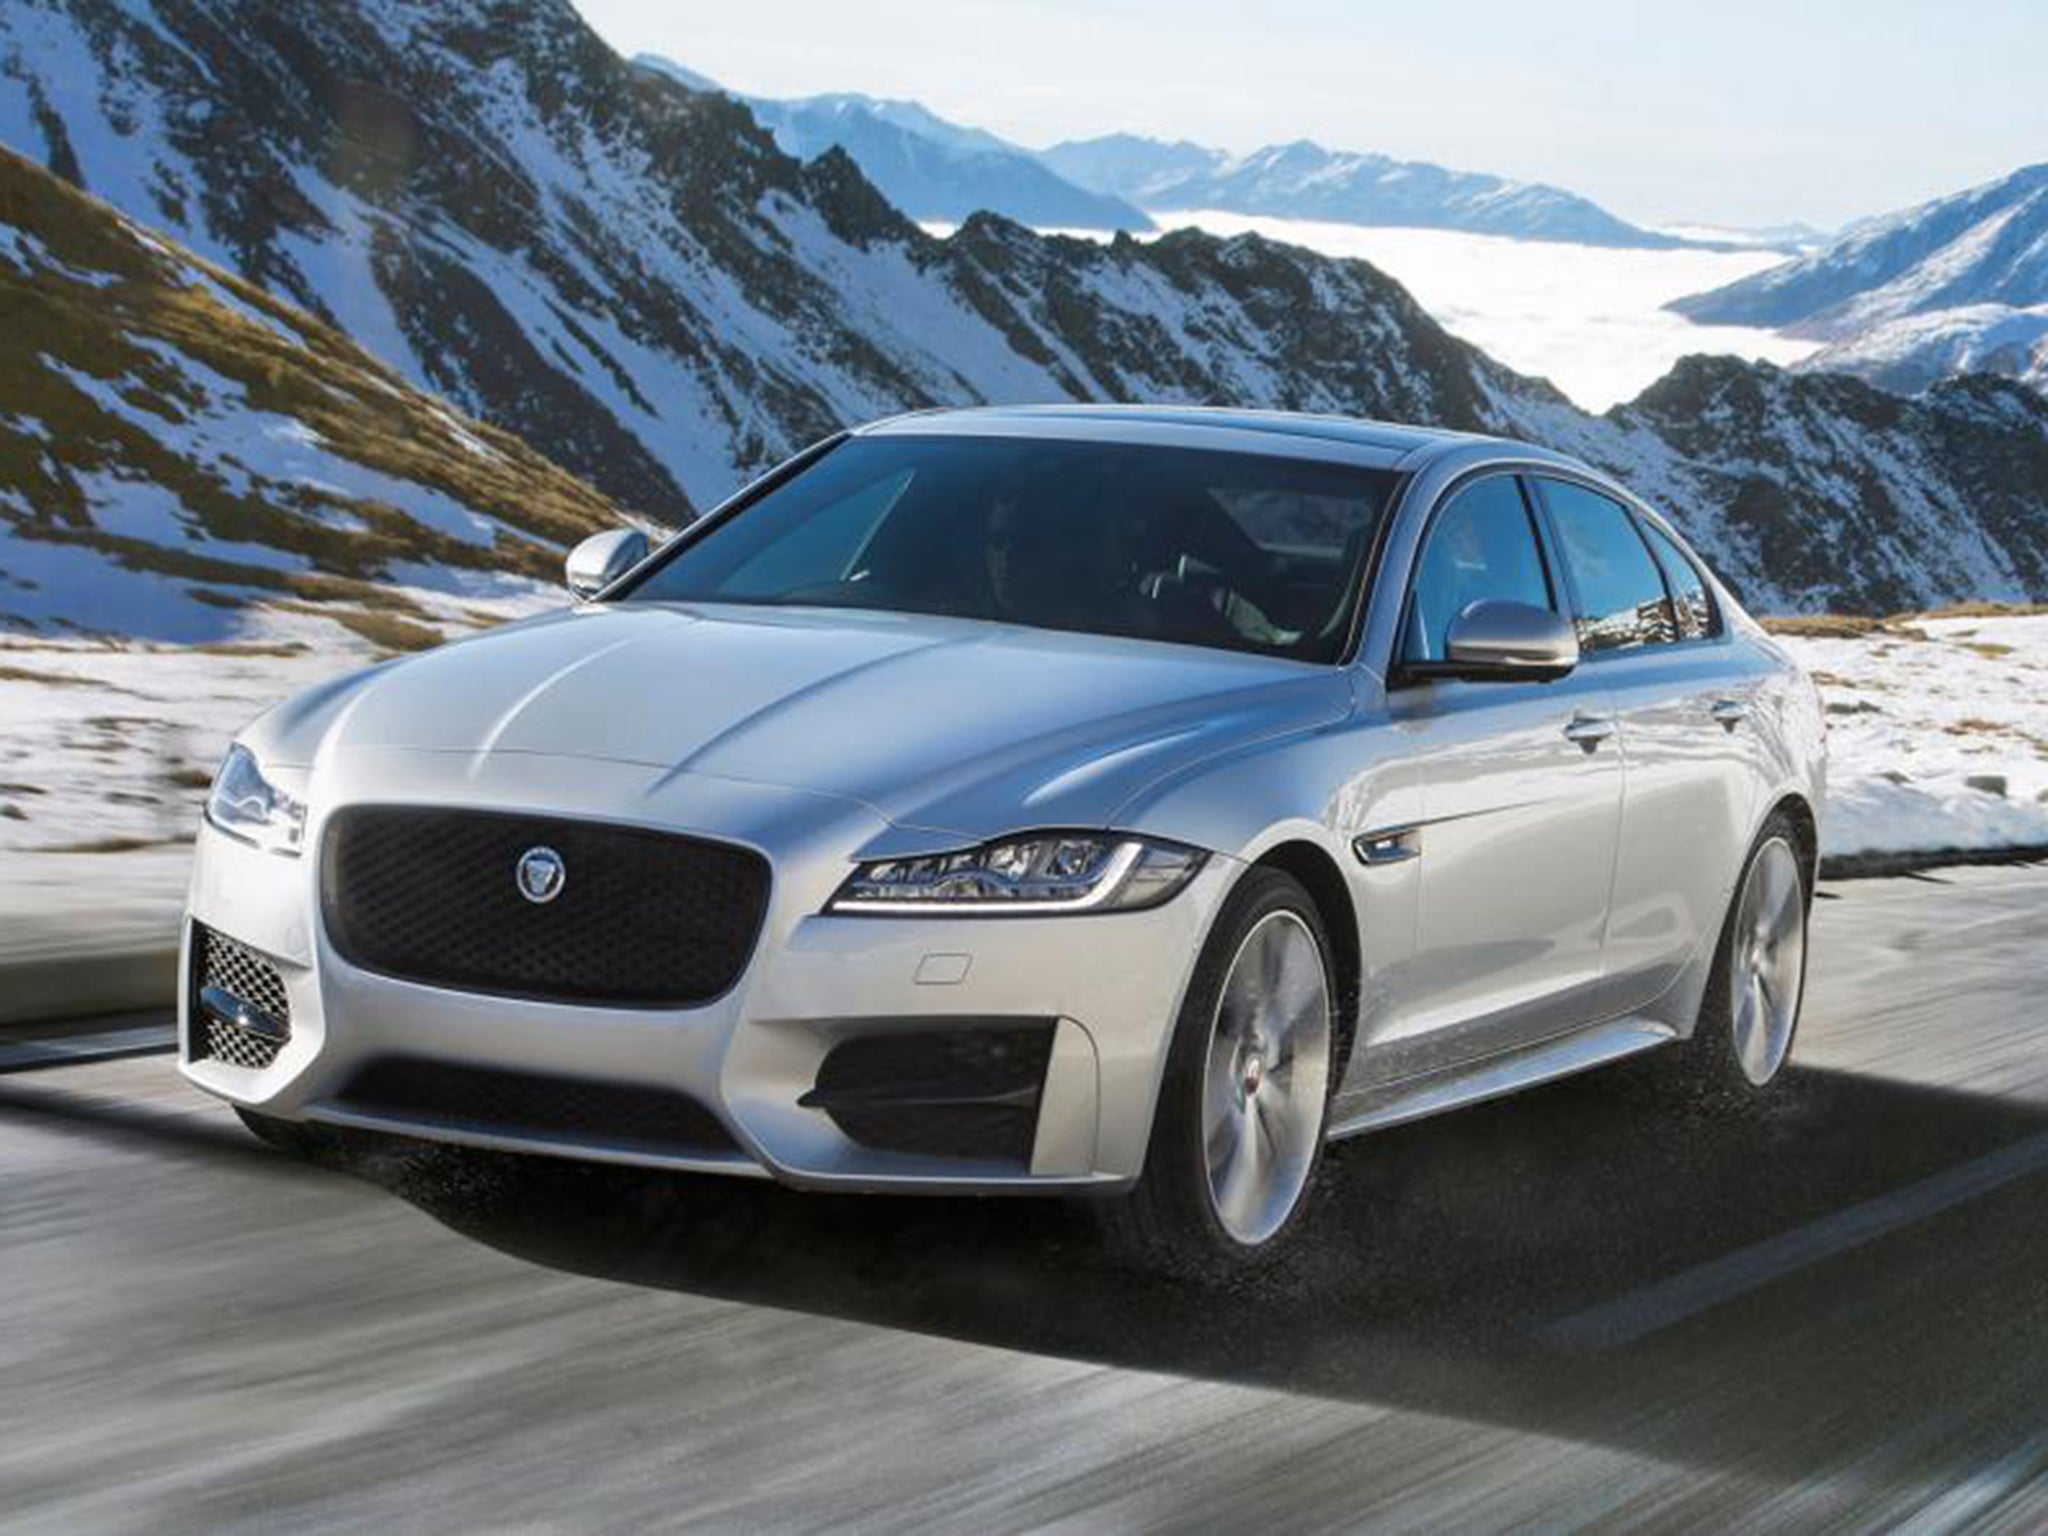 The XF uses the same Intelligent Driving Dynamics system as the AWD F-Type